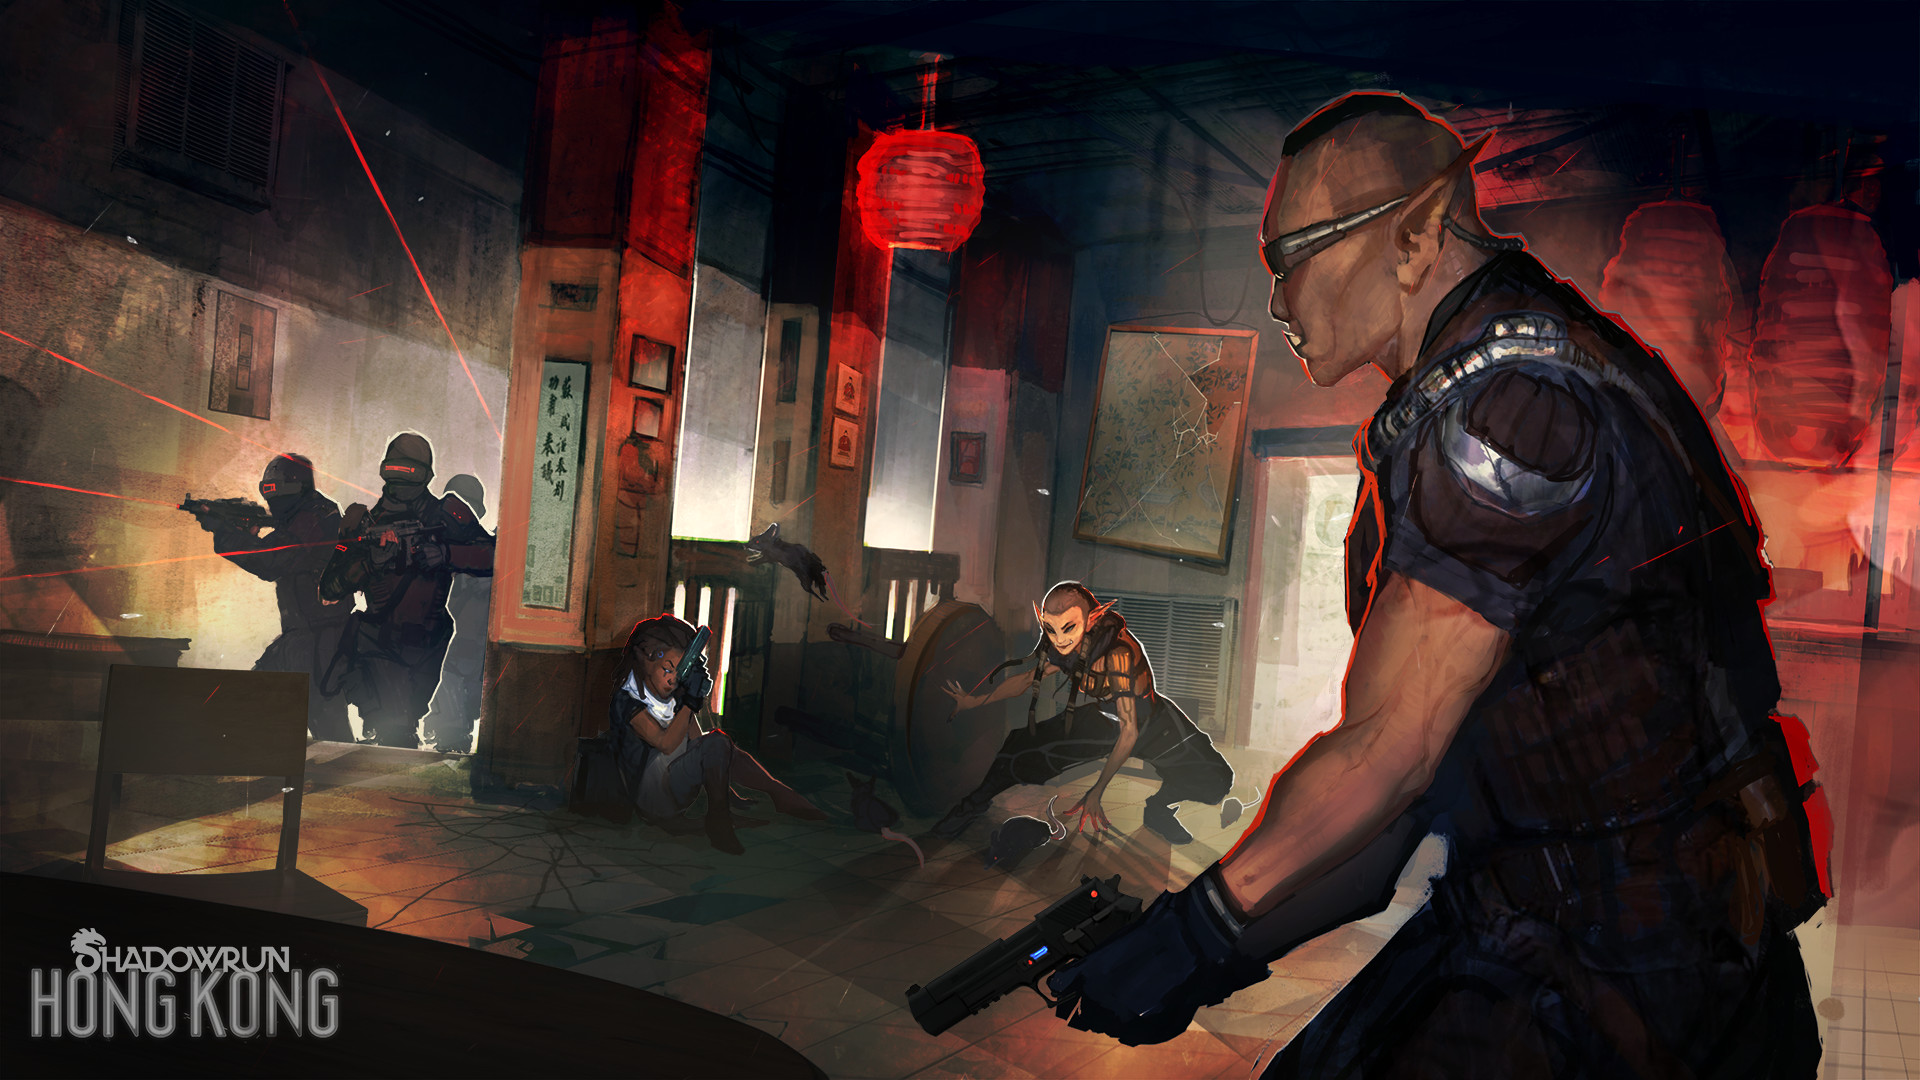 1920x1080 Concept art from the Shadowrun: Hong Kong video game by Harebrained Schemes